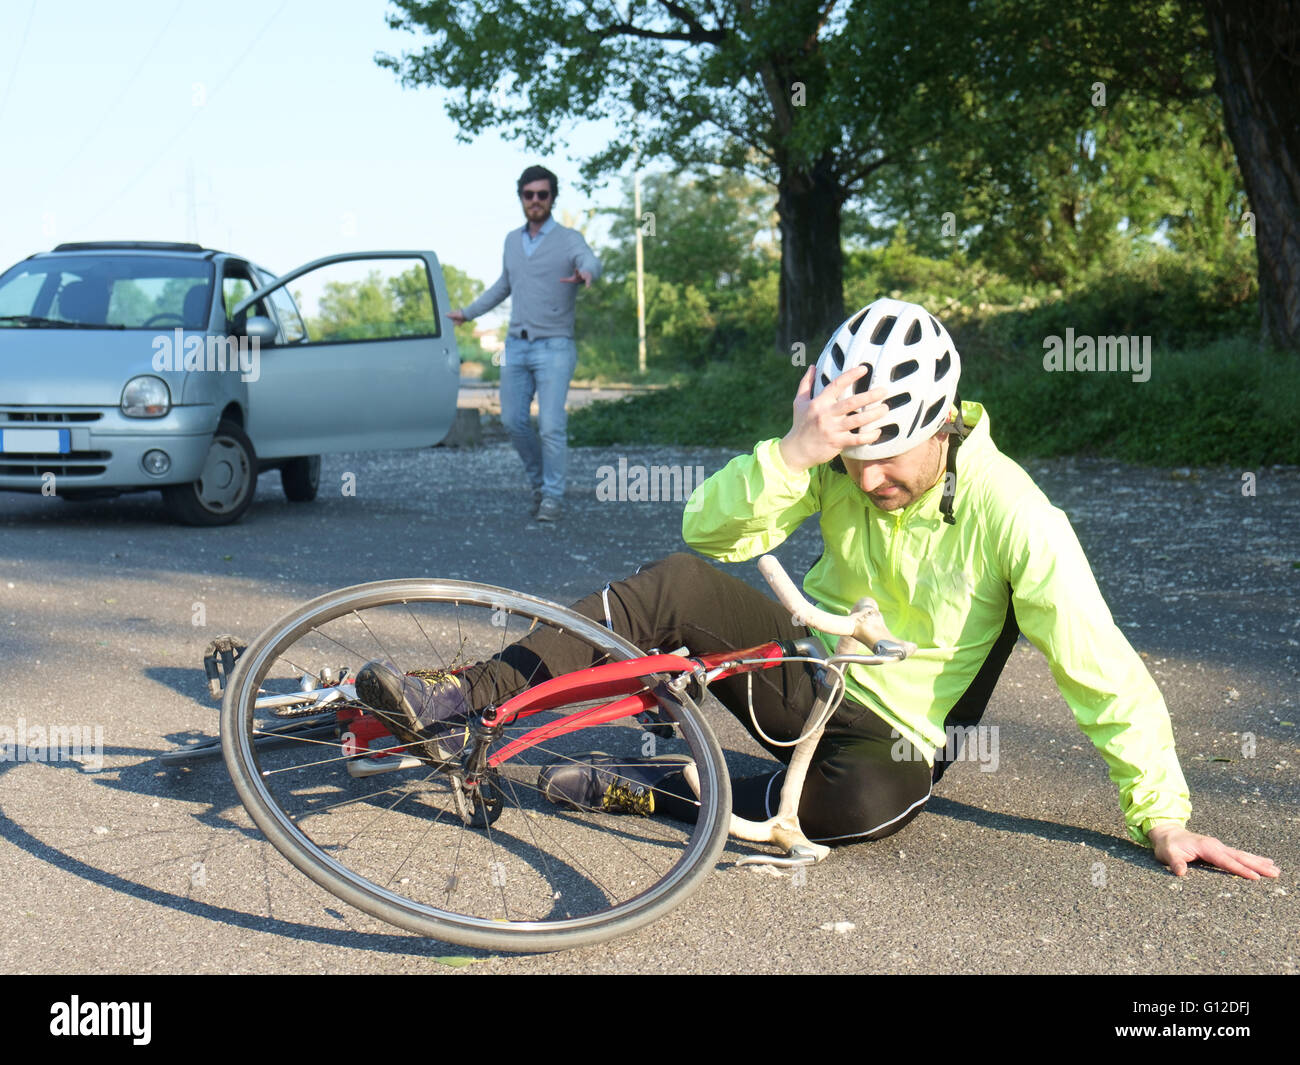 Bicycle Accident High Resolution Stock Photography and Images - Alamy